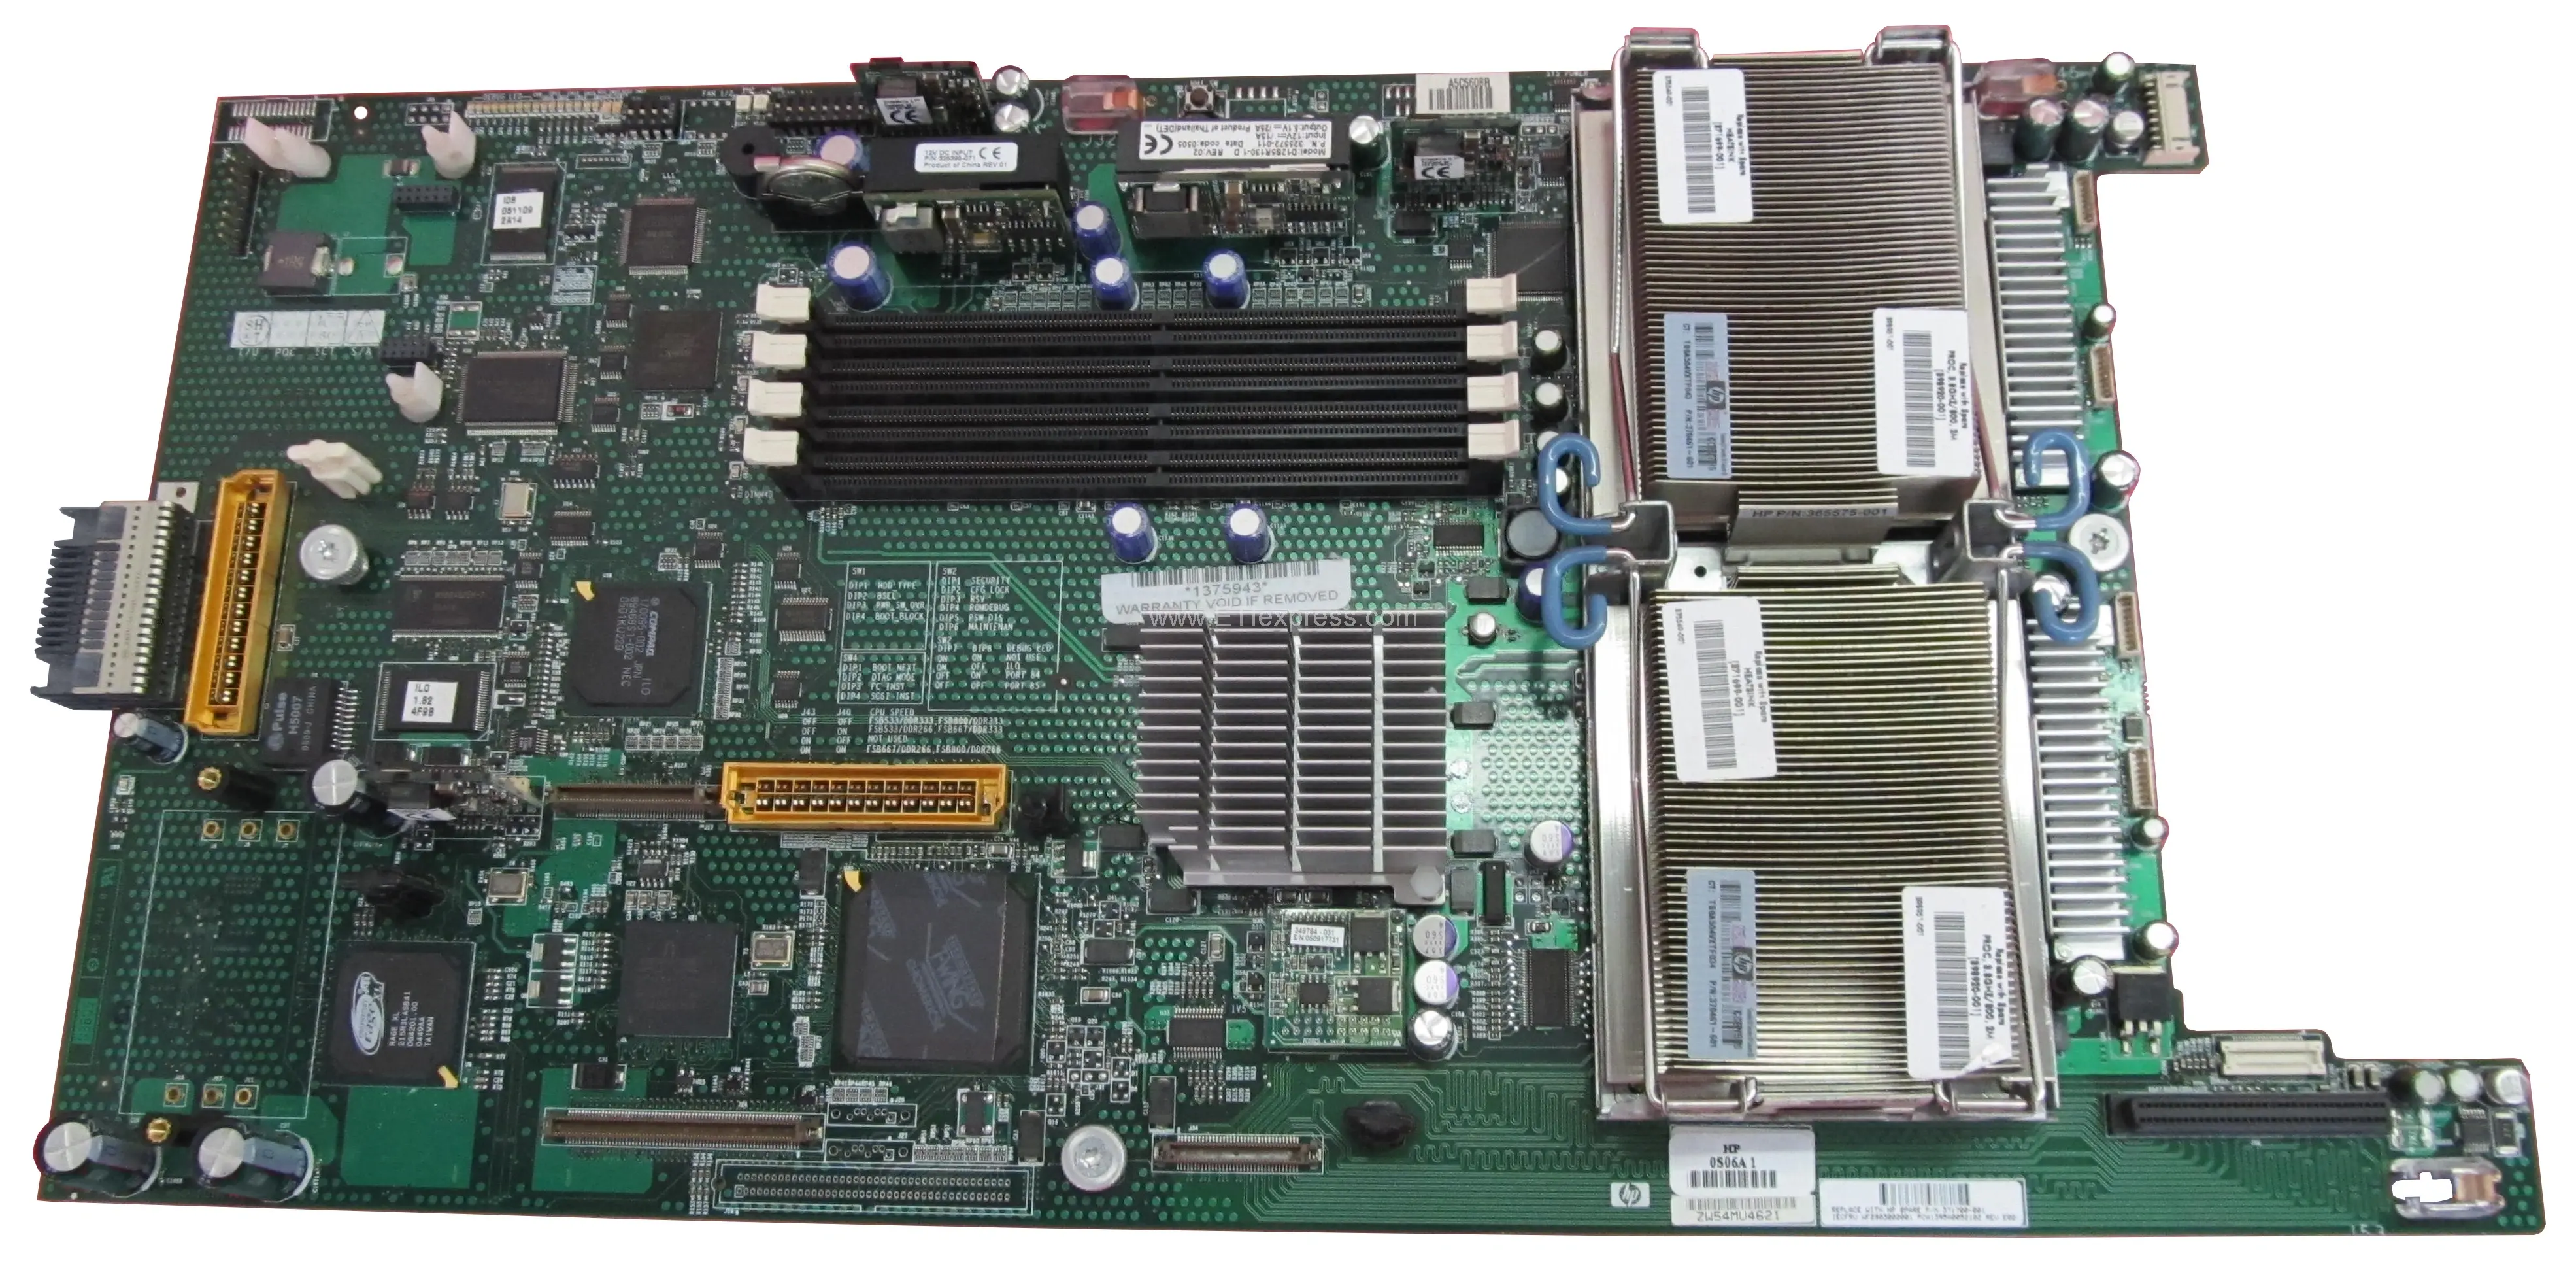 371700-001 HP System Board (Motherboard) for HP ProLiant BL20p G3 Server